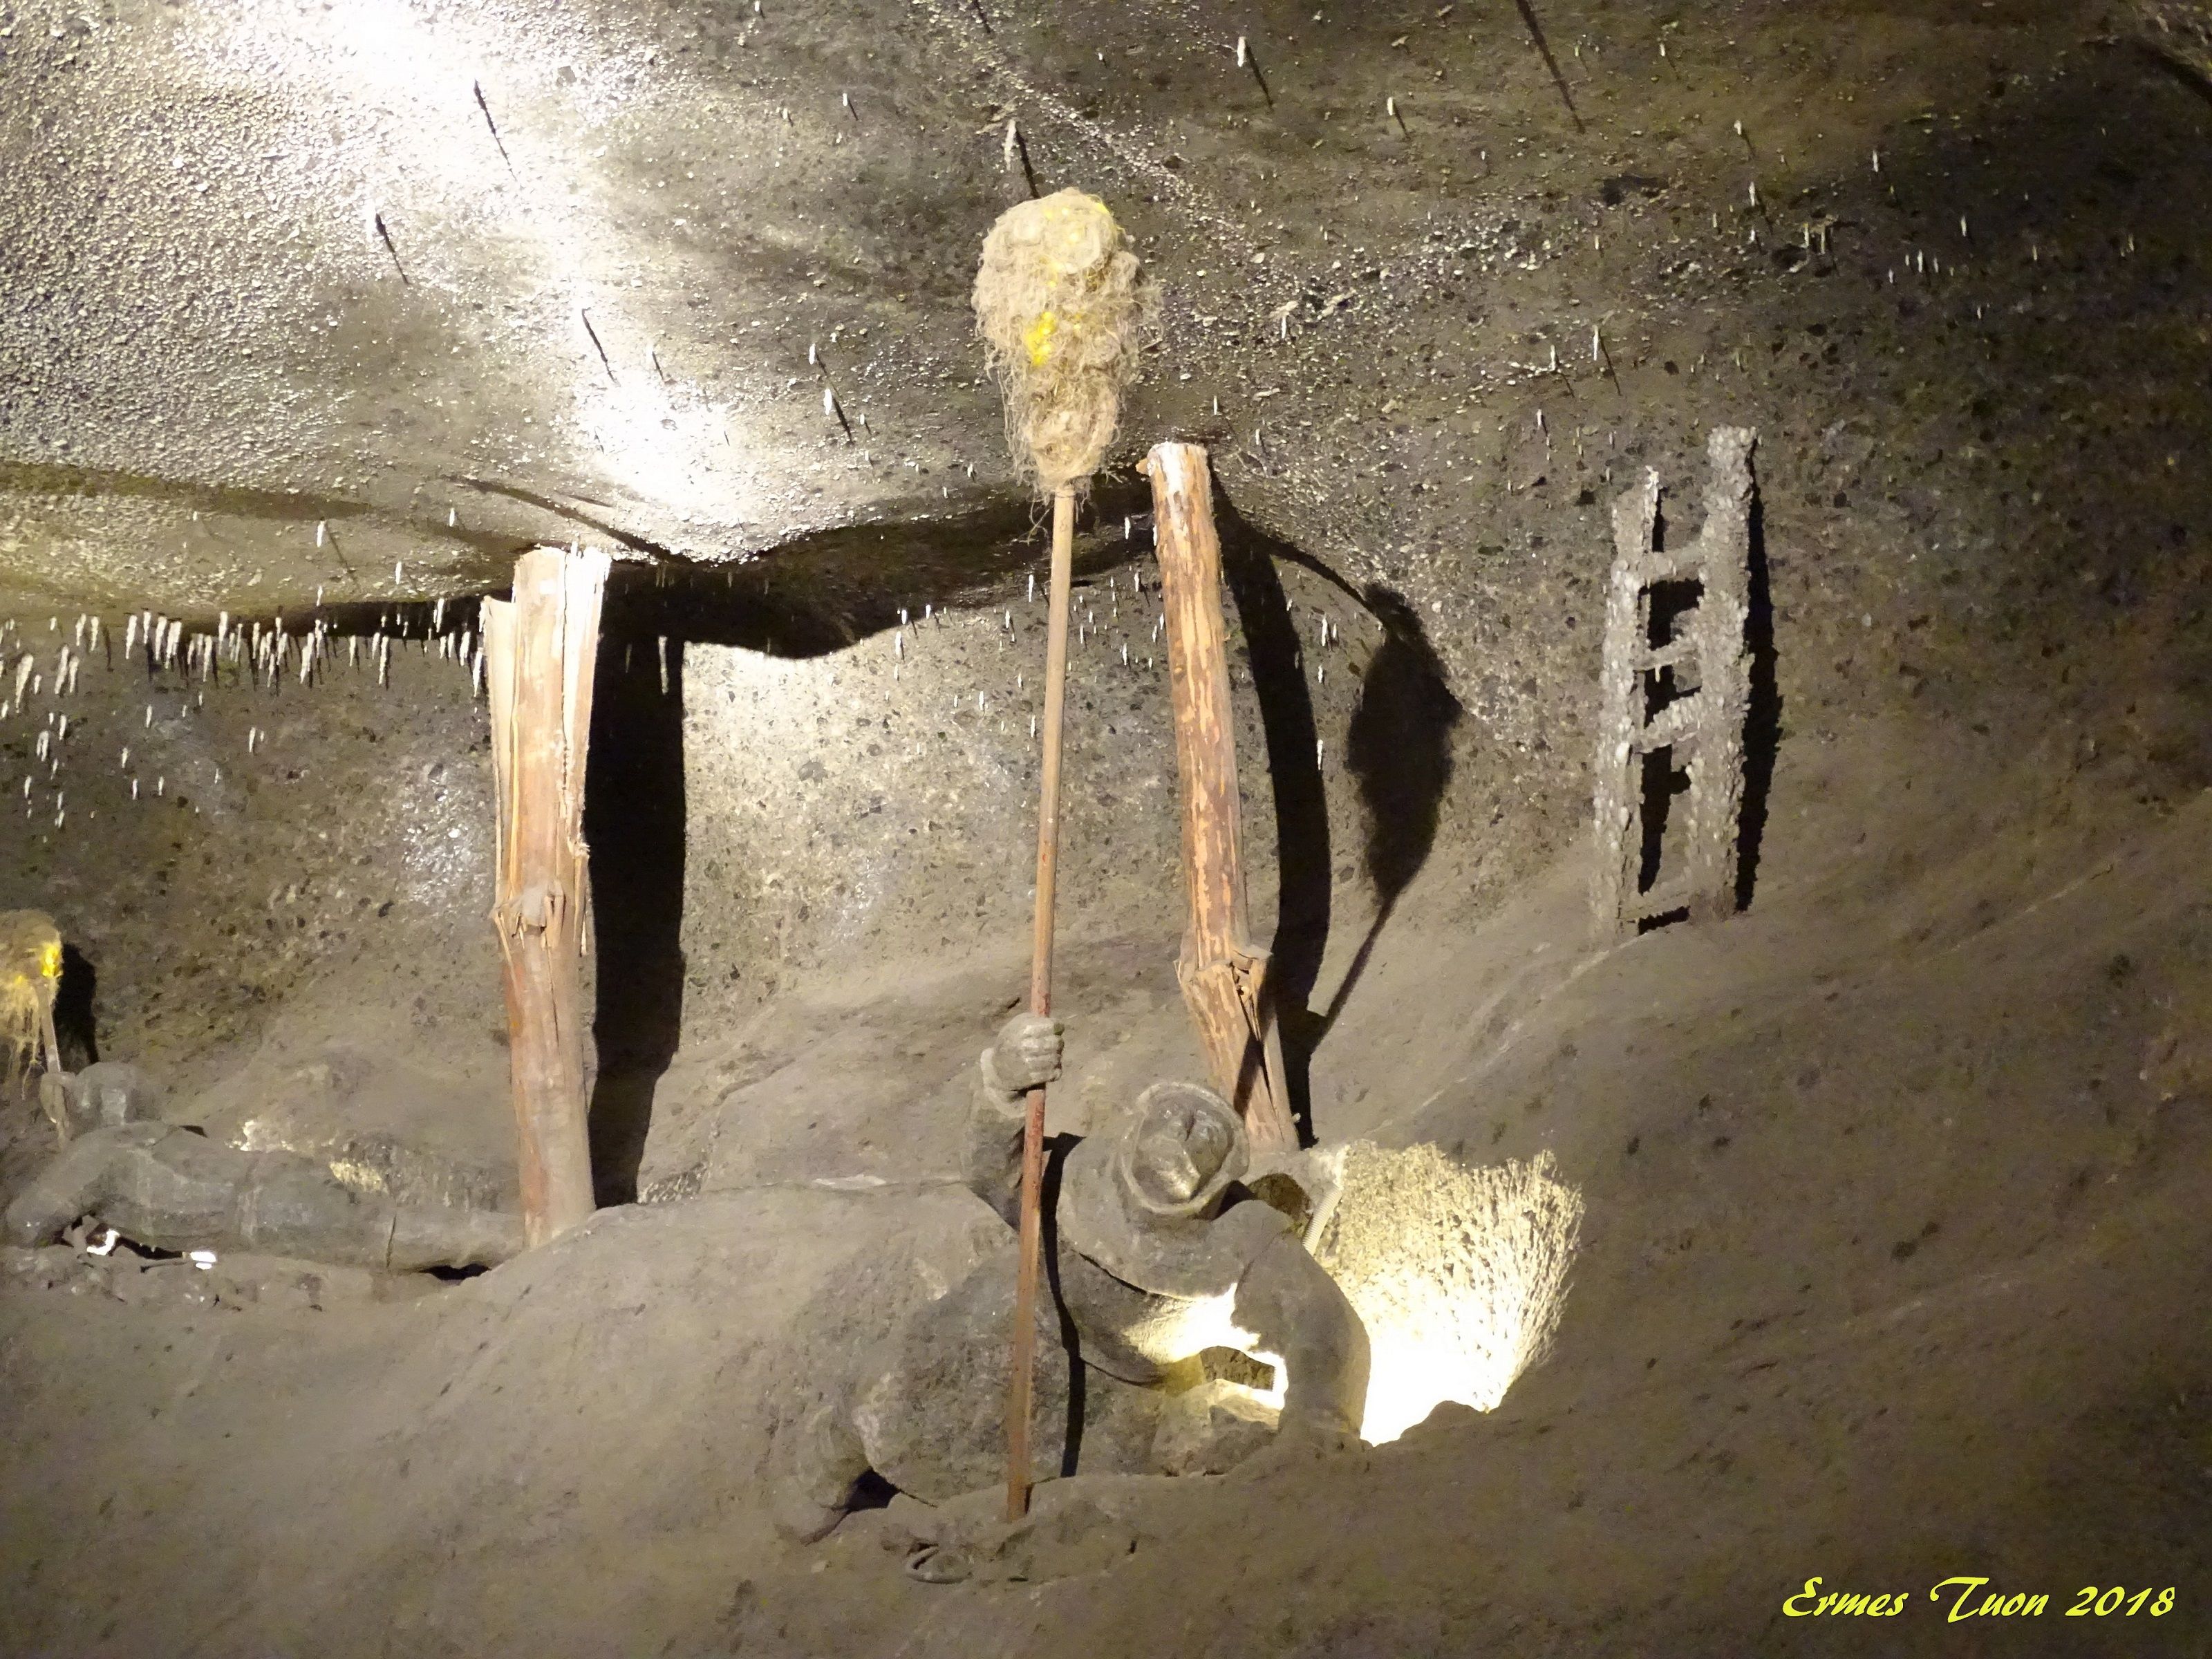 Caption: a miner illuminates the cave  -  historical representation of the work in the mine - Photo: Local Guide @ermest